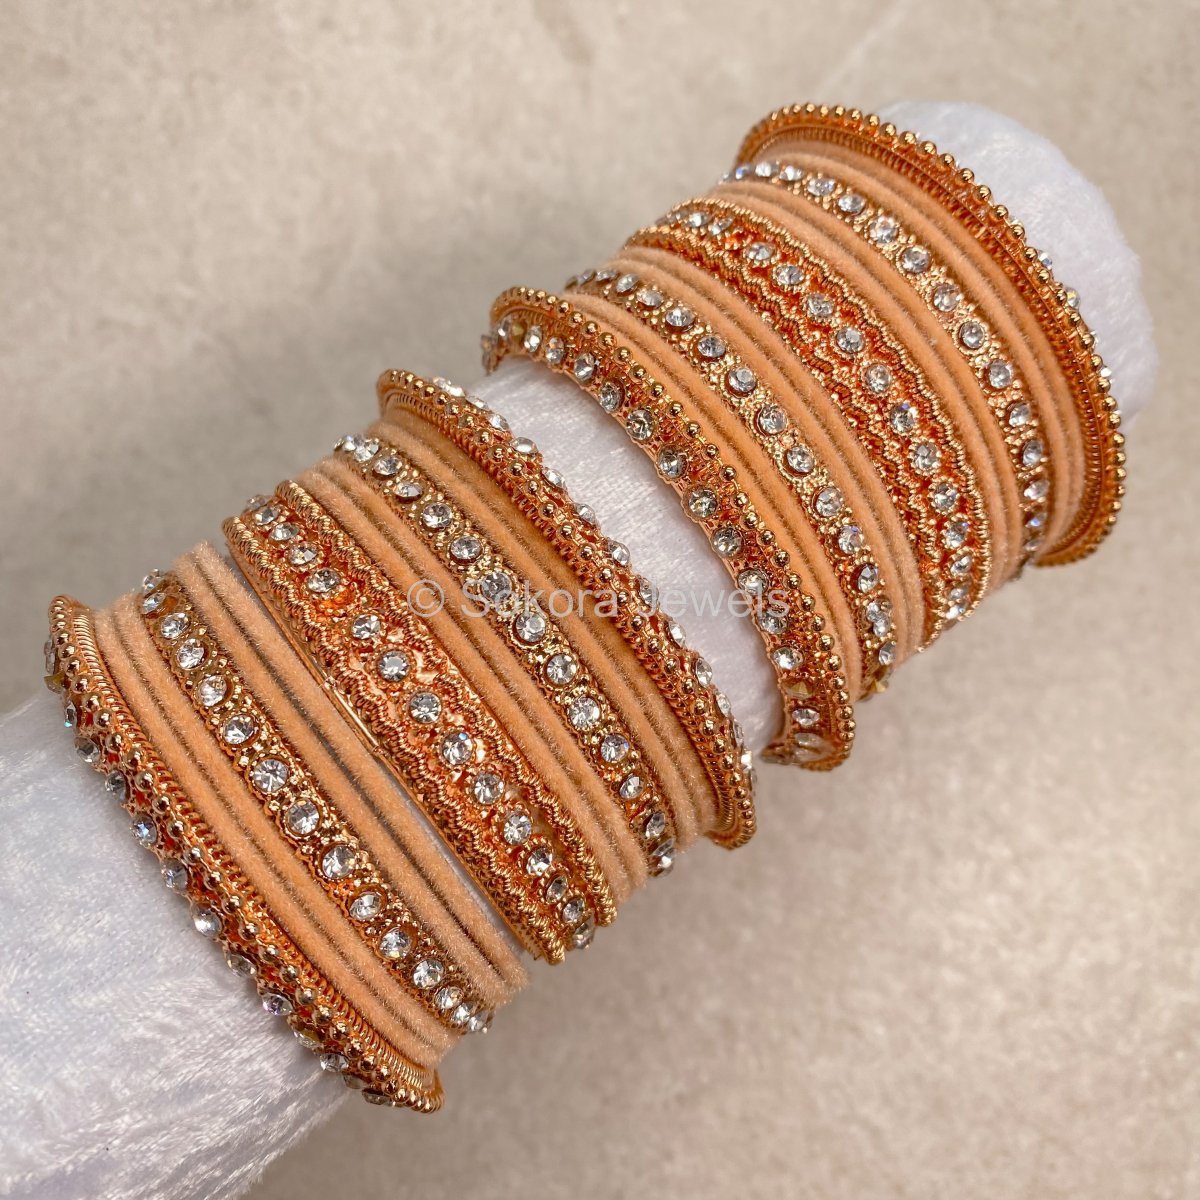 (Slightly less than perfect) 2 x Clearance Bangle Set - 2.4 - SOKORA JEWELS(Slightly less than perfect) 2 x Clearance Bangle Set - 2.4BANGLES